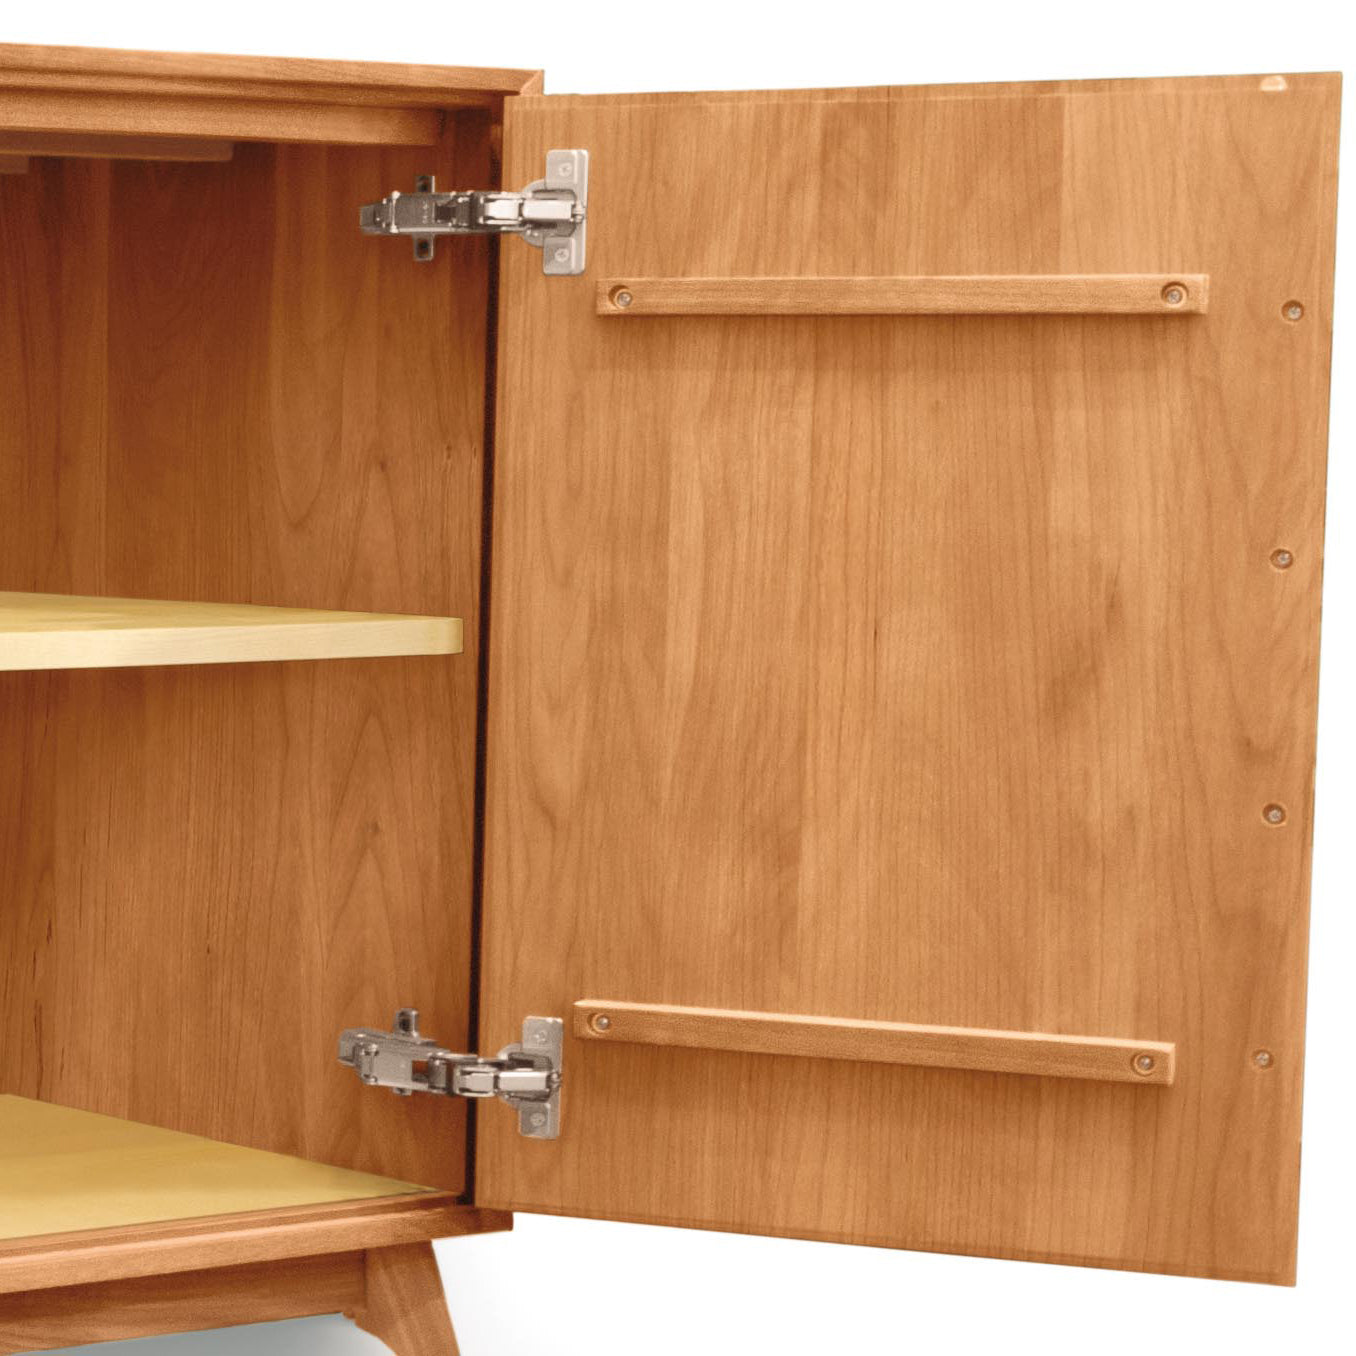 A Audrey 2-Door 3-Drawer Buffet with an open door revealing internal shelves, featuring metal hinges and a metal handle on the door, crafted by Copeland Furniture.